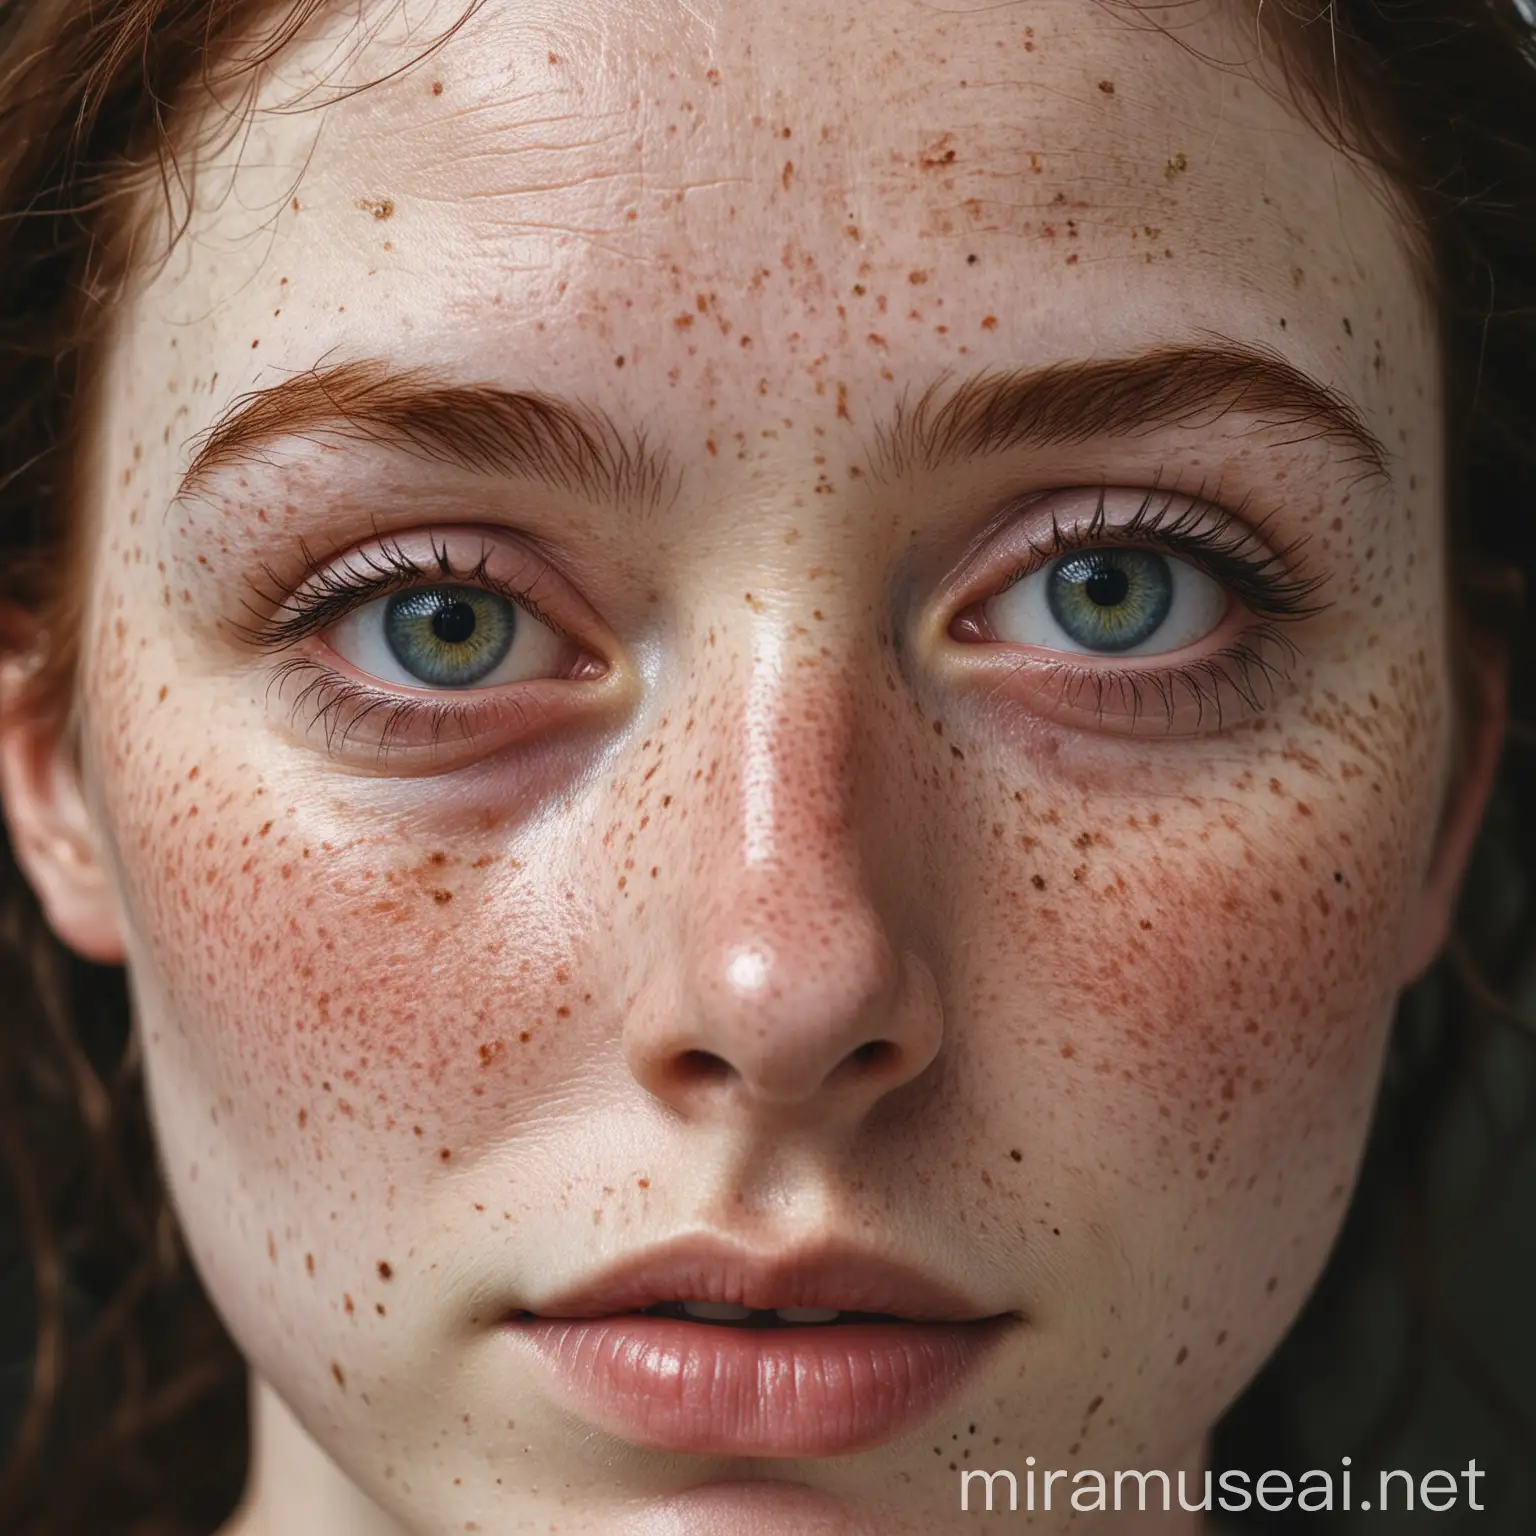 
pale face of a woman with freckles, with a congighia on the eye